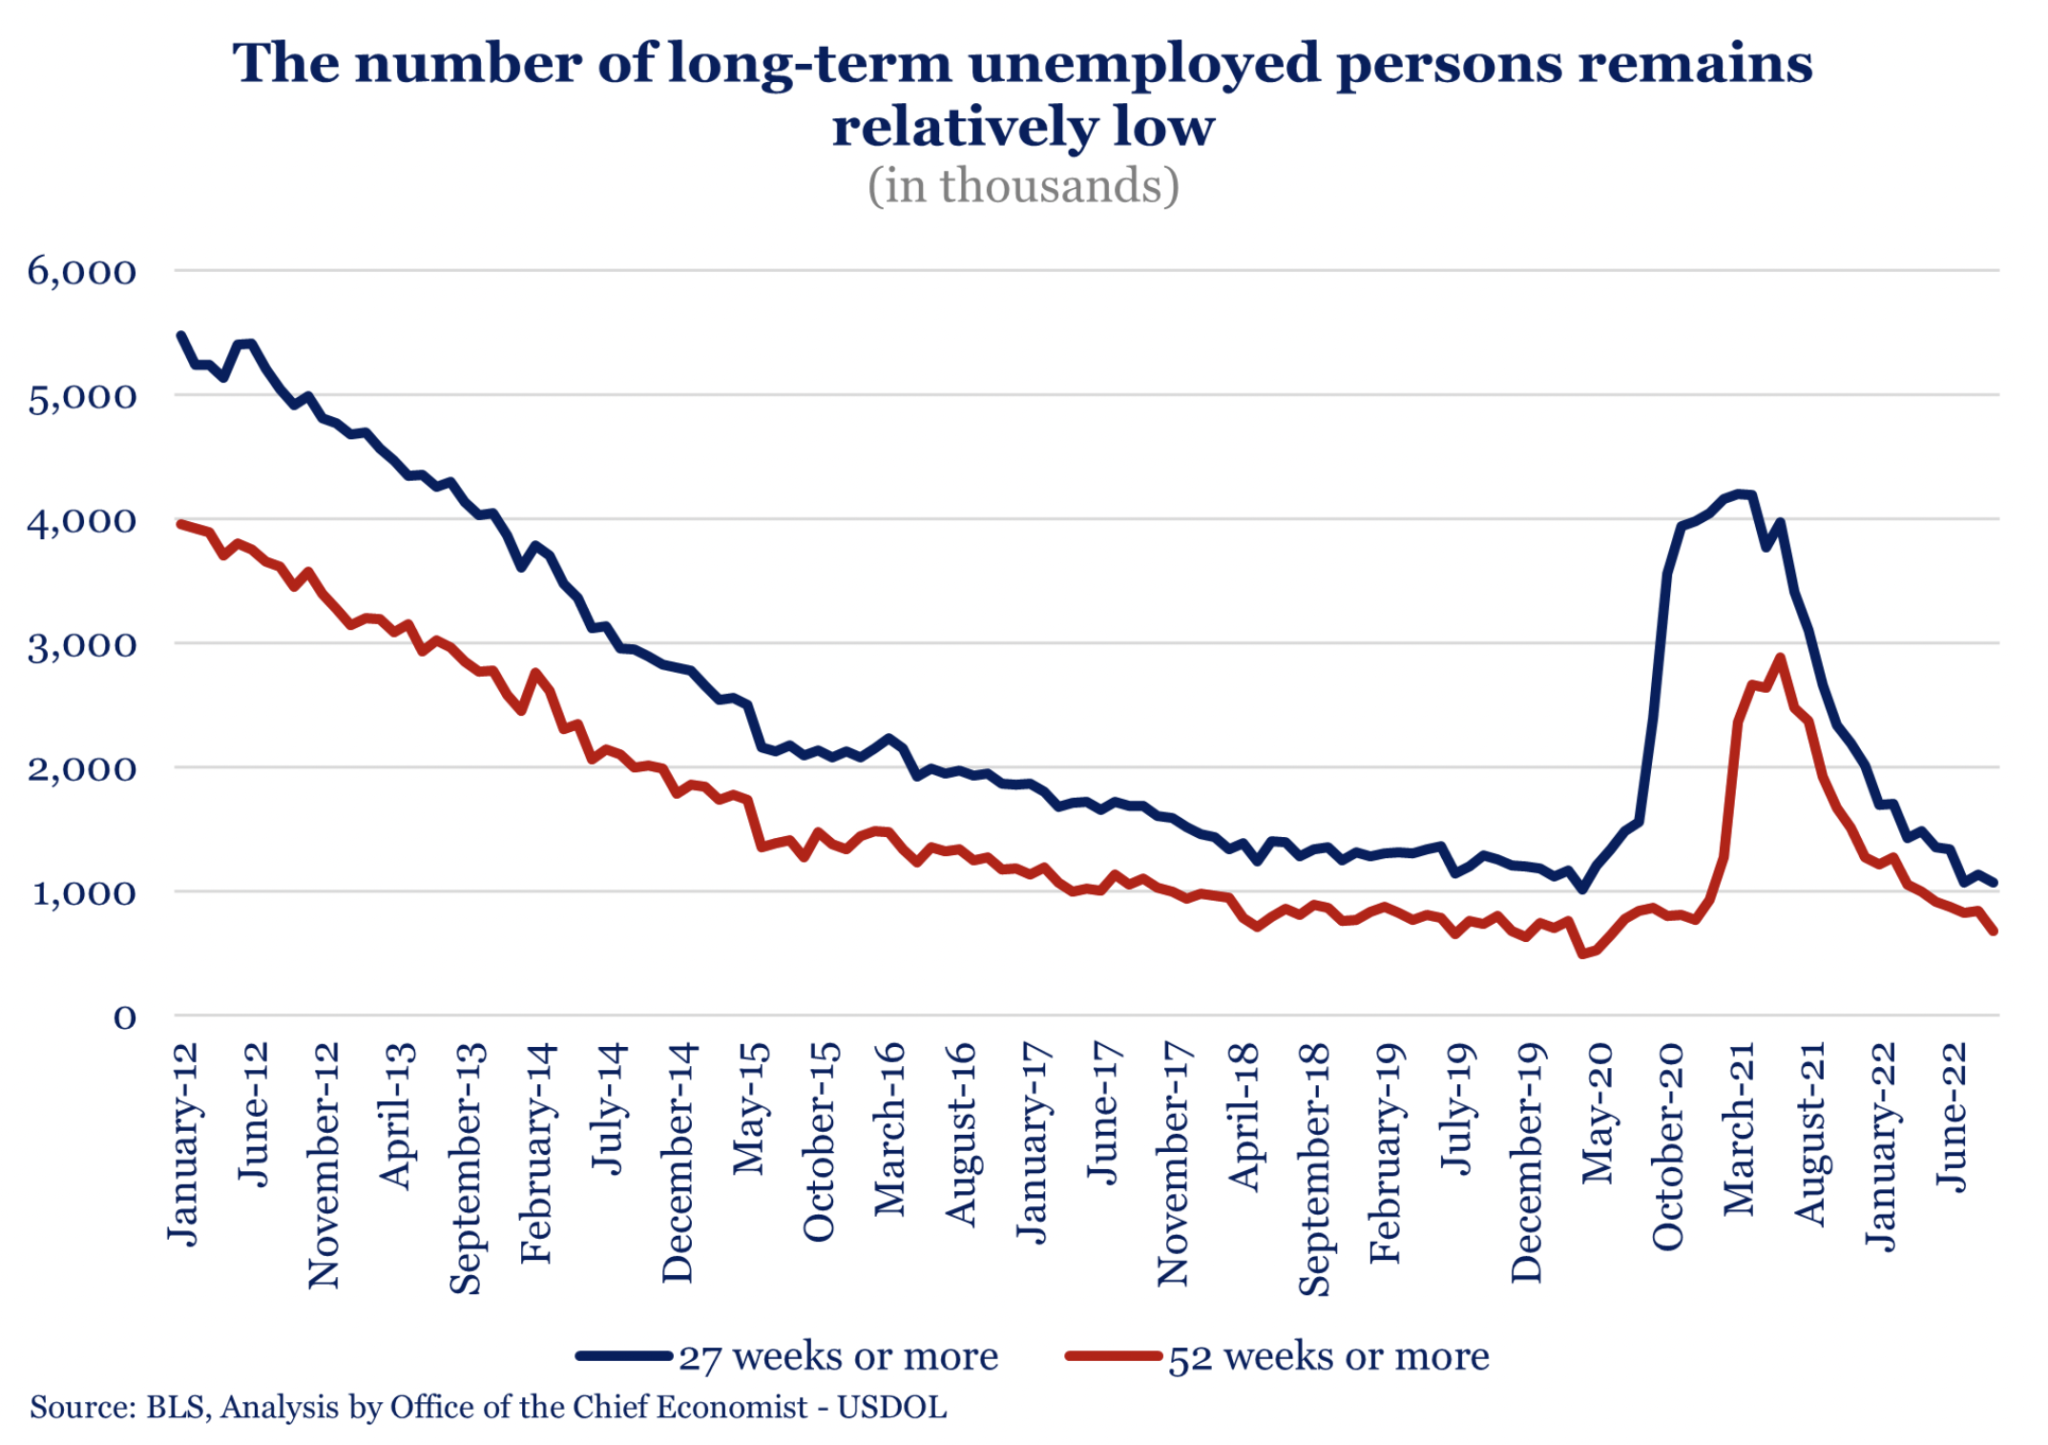 The Number of Long-Term Unemployed Persons Remains Relatively Low